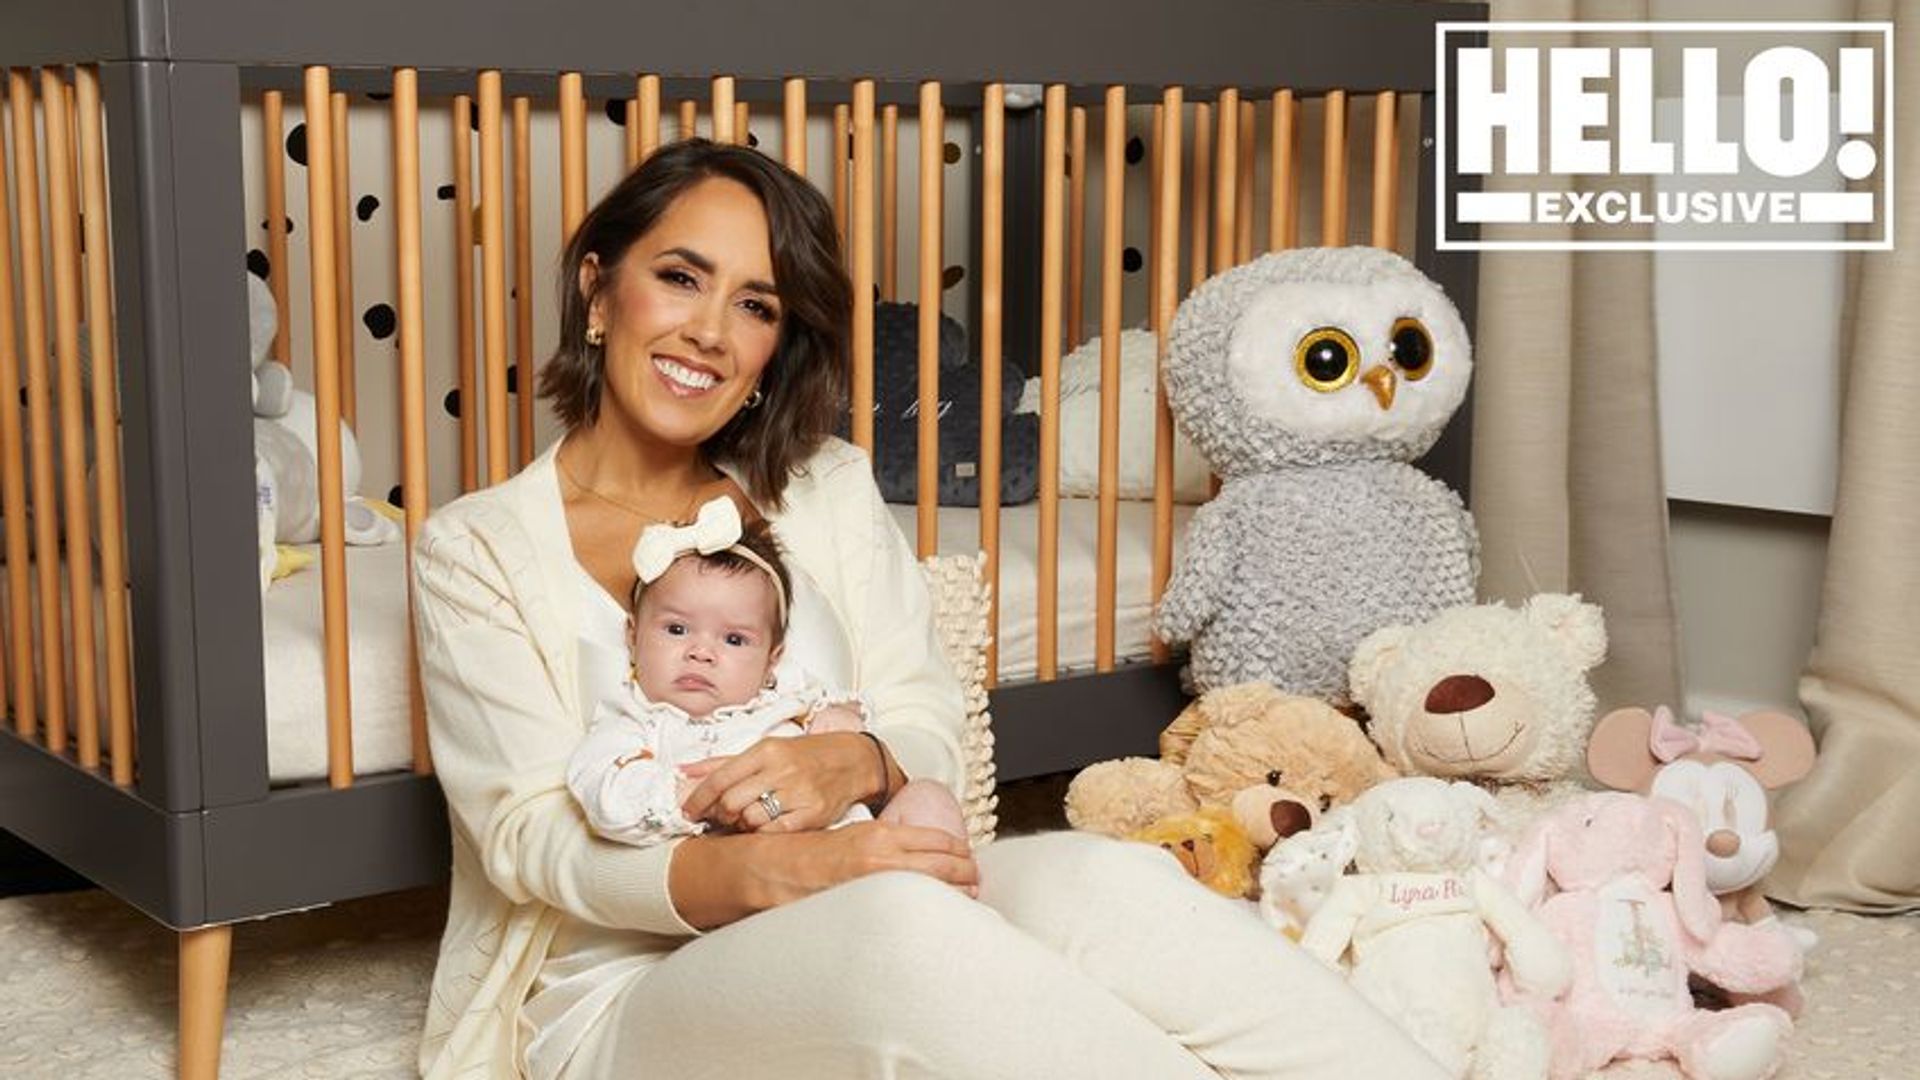 Janette Manrara cosied up to her daughter Lyra in her nursery